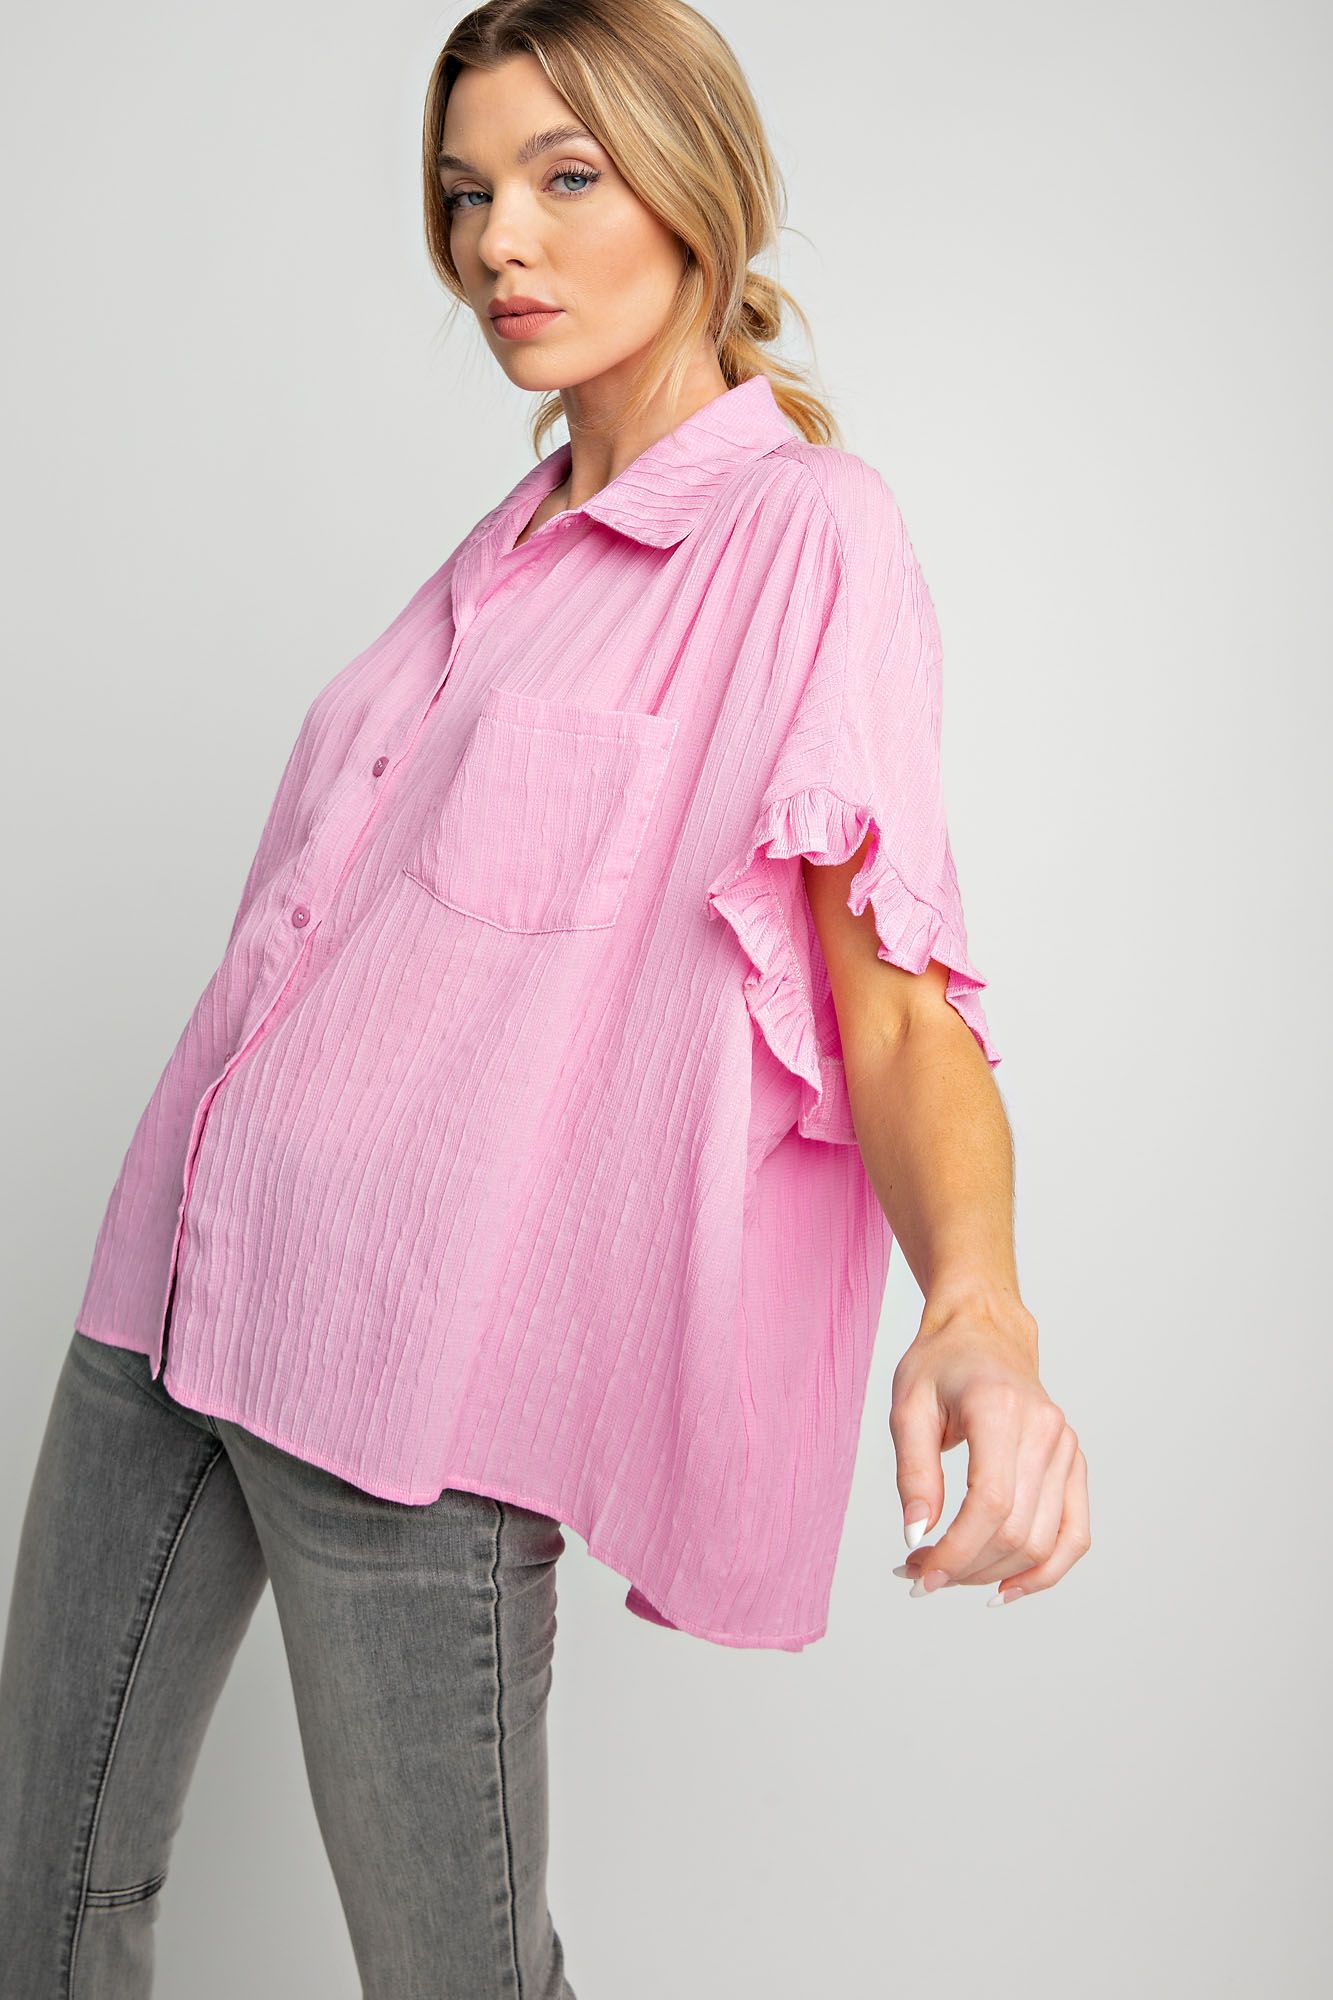 Easel Plus Bubble Gum Pink Textured Woven Ruffle Top